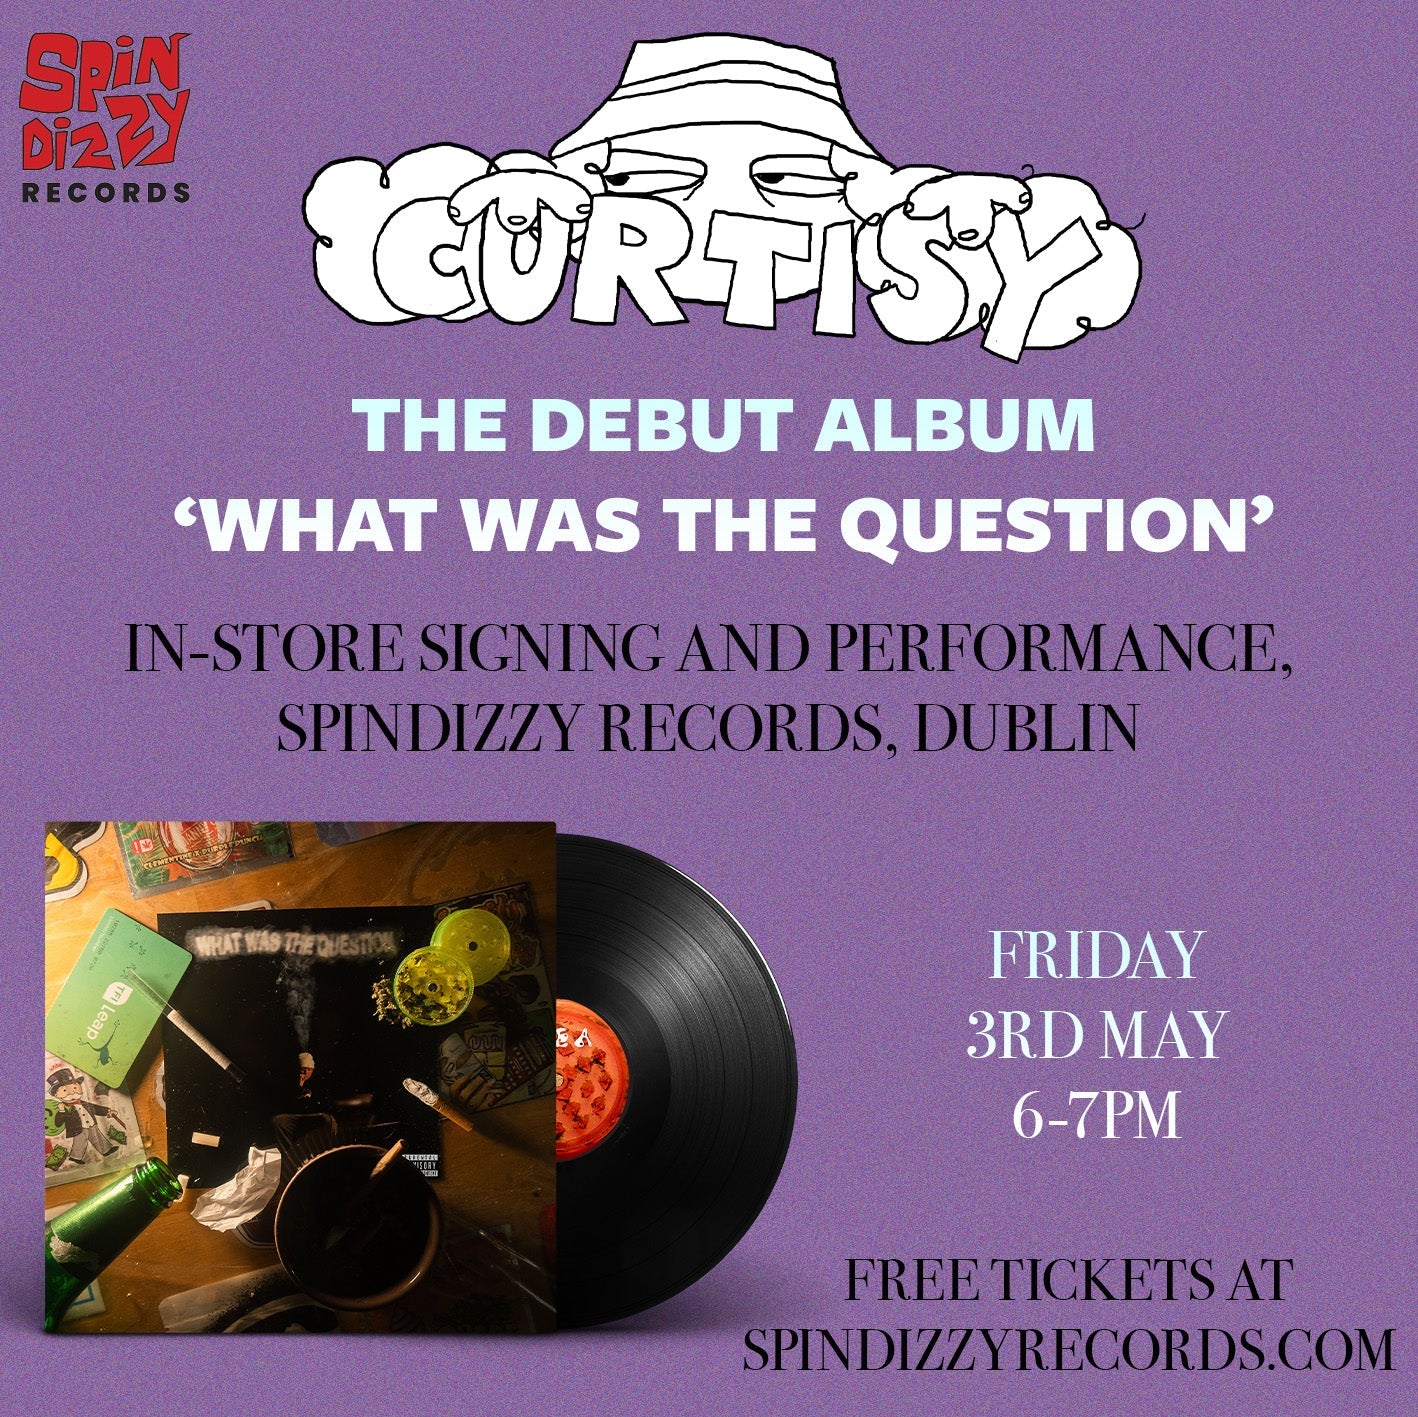 CURTISY - Instore live performance + Signed copy of the vinyl- Friday, MAY 3rd @ 6pm